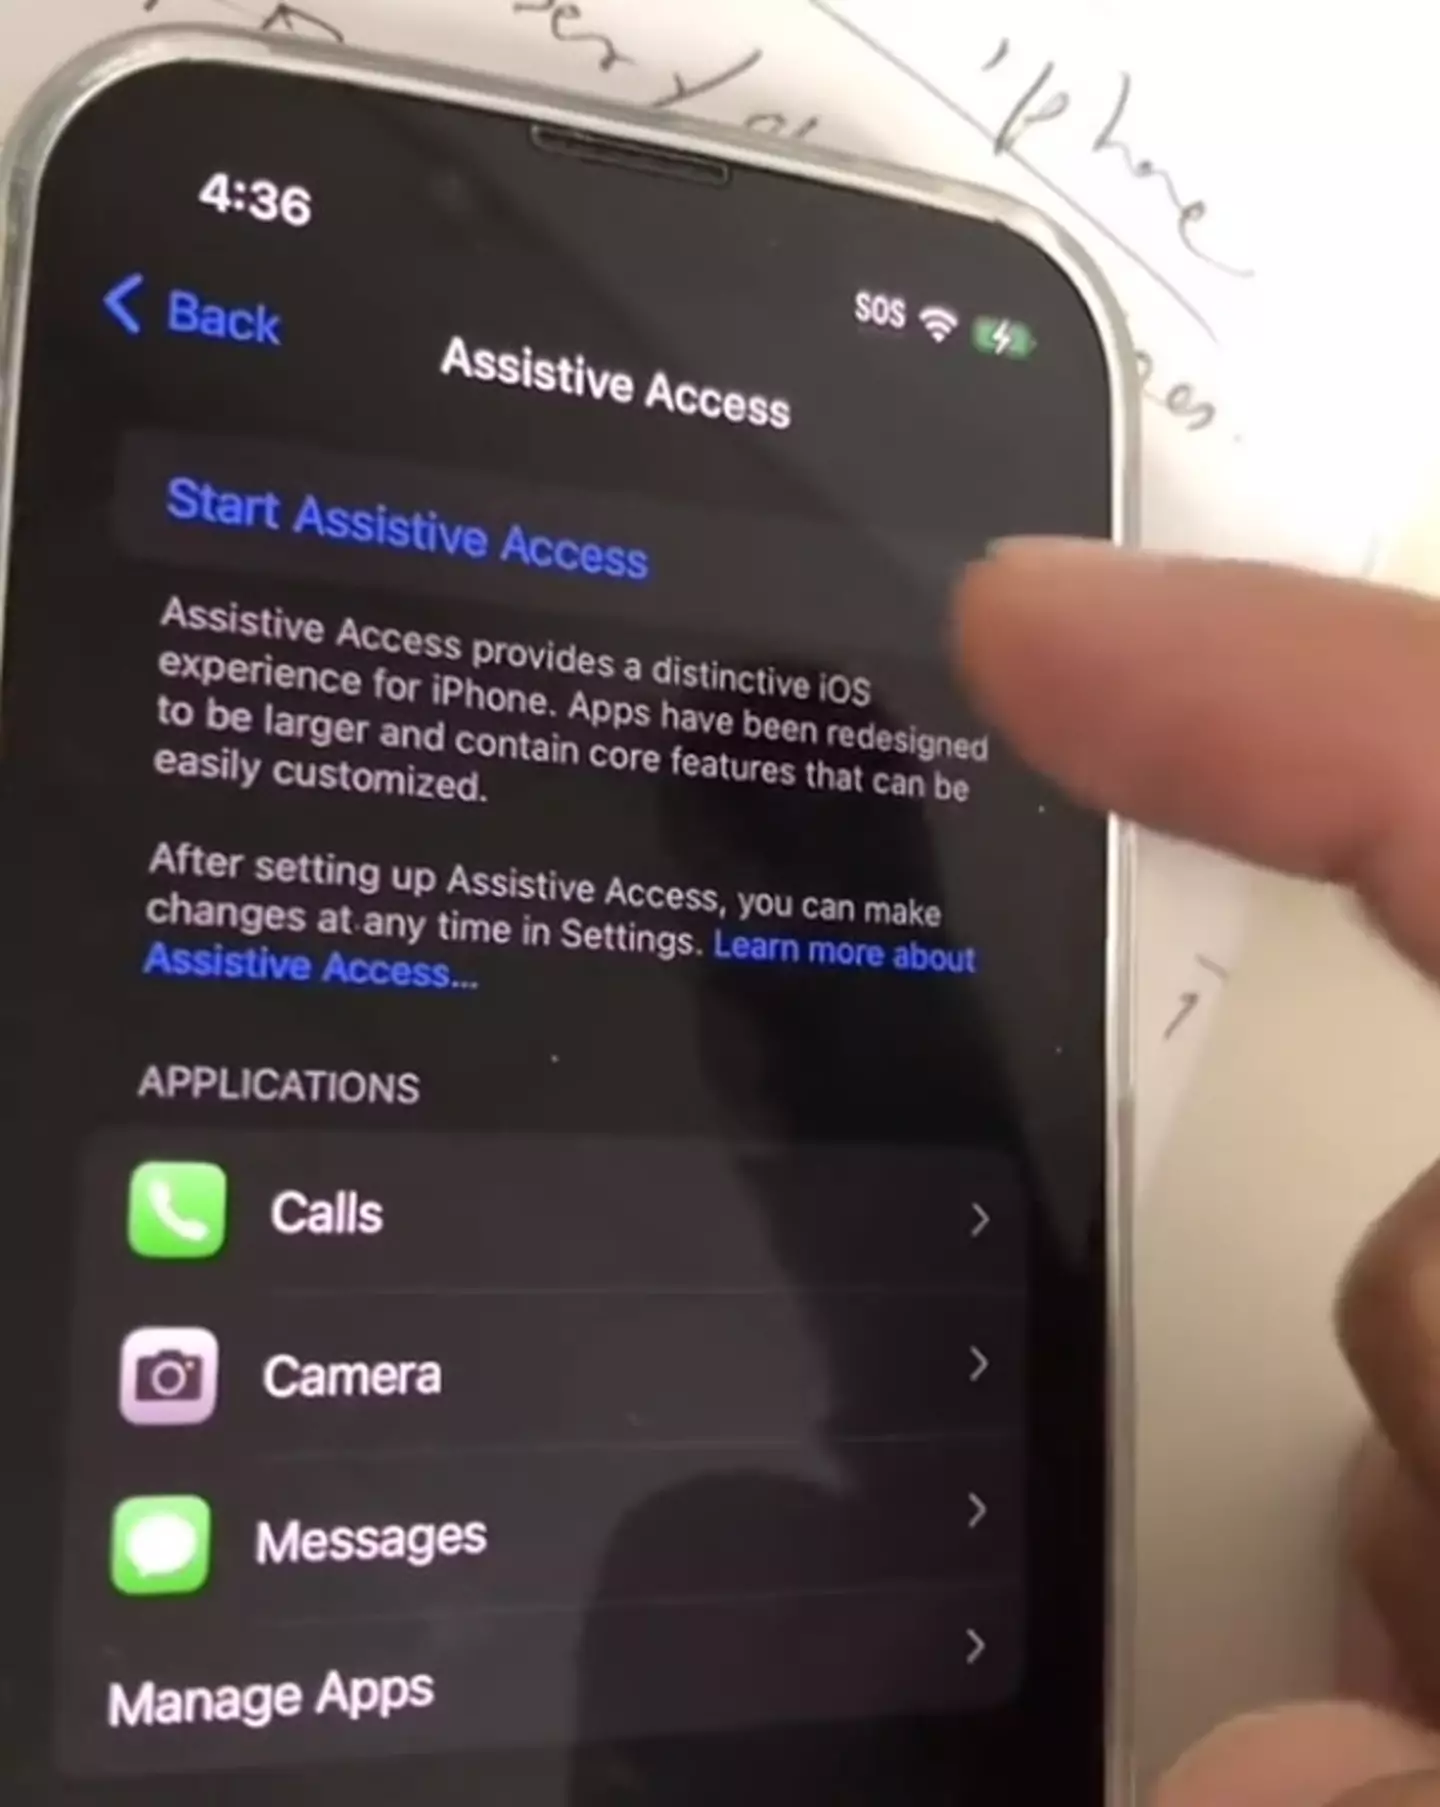 After downloading the new iPhone update go into your settings and find Assistive Access.